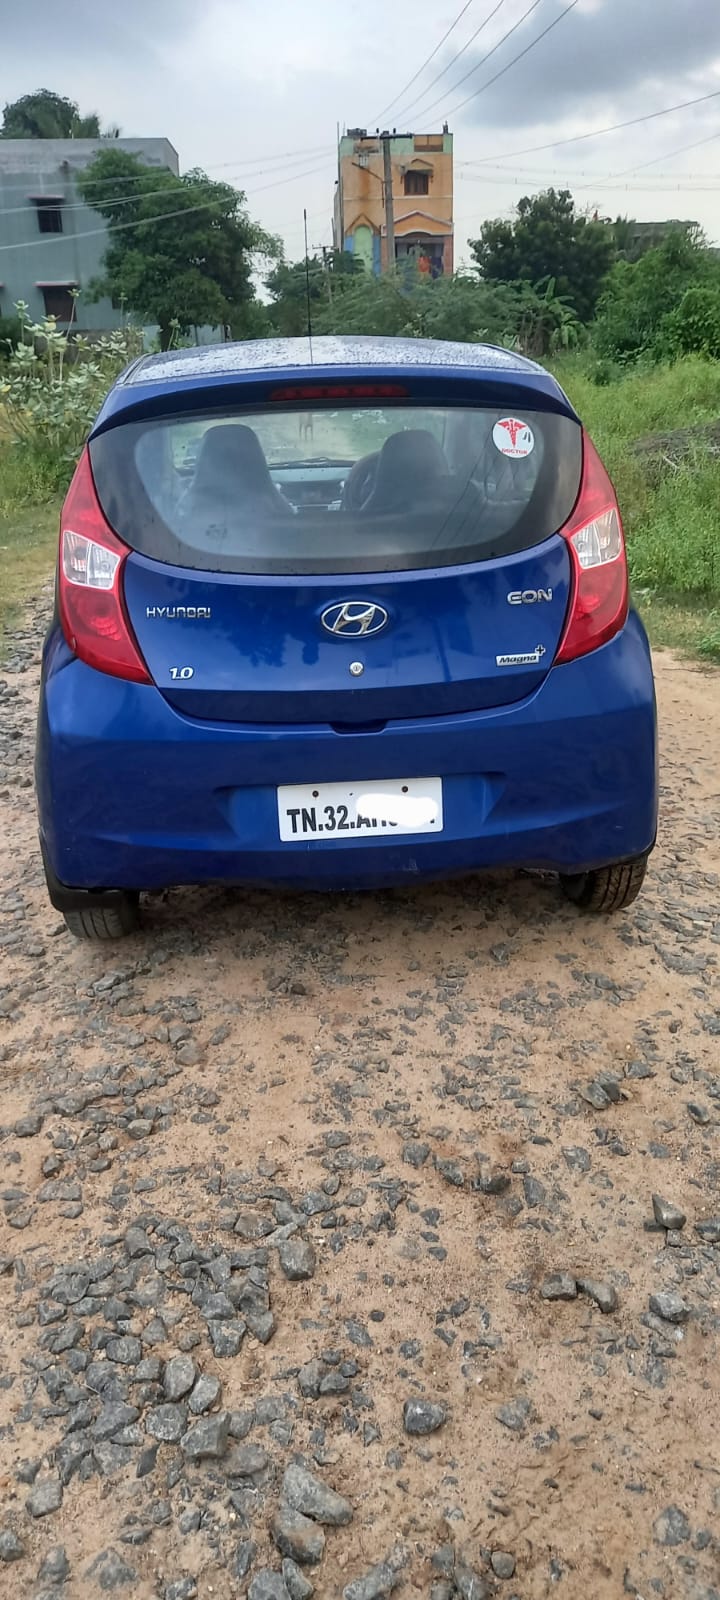 5208-for-sale-Hyundai-Eon-Petrol-First-Owner-2015-TN-registered-rs-0